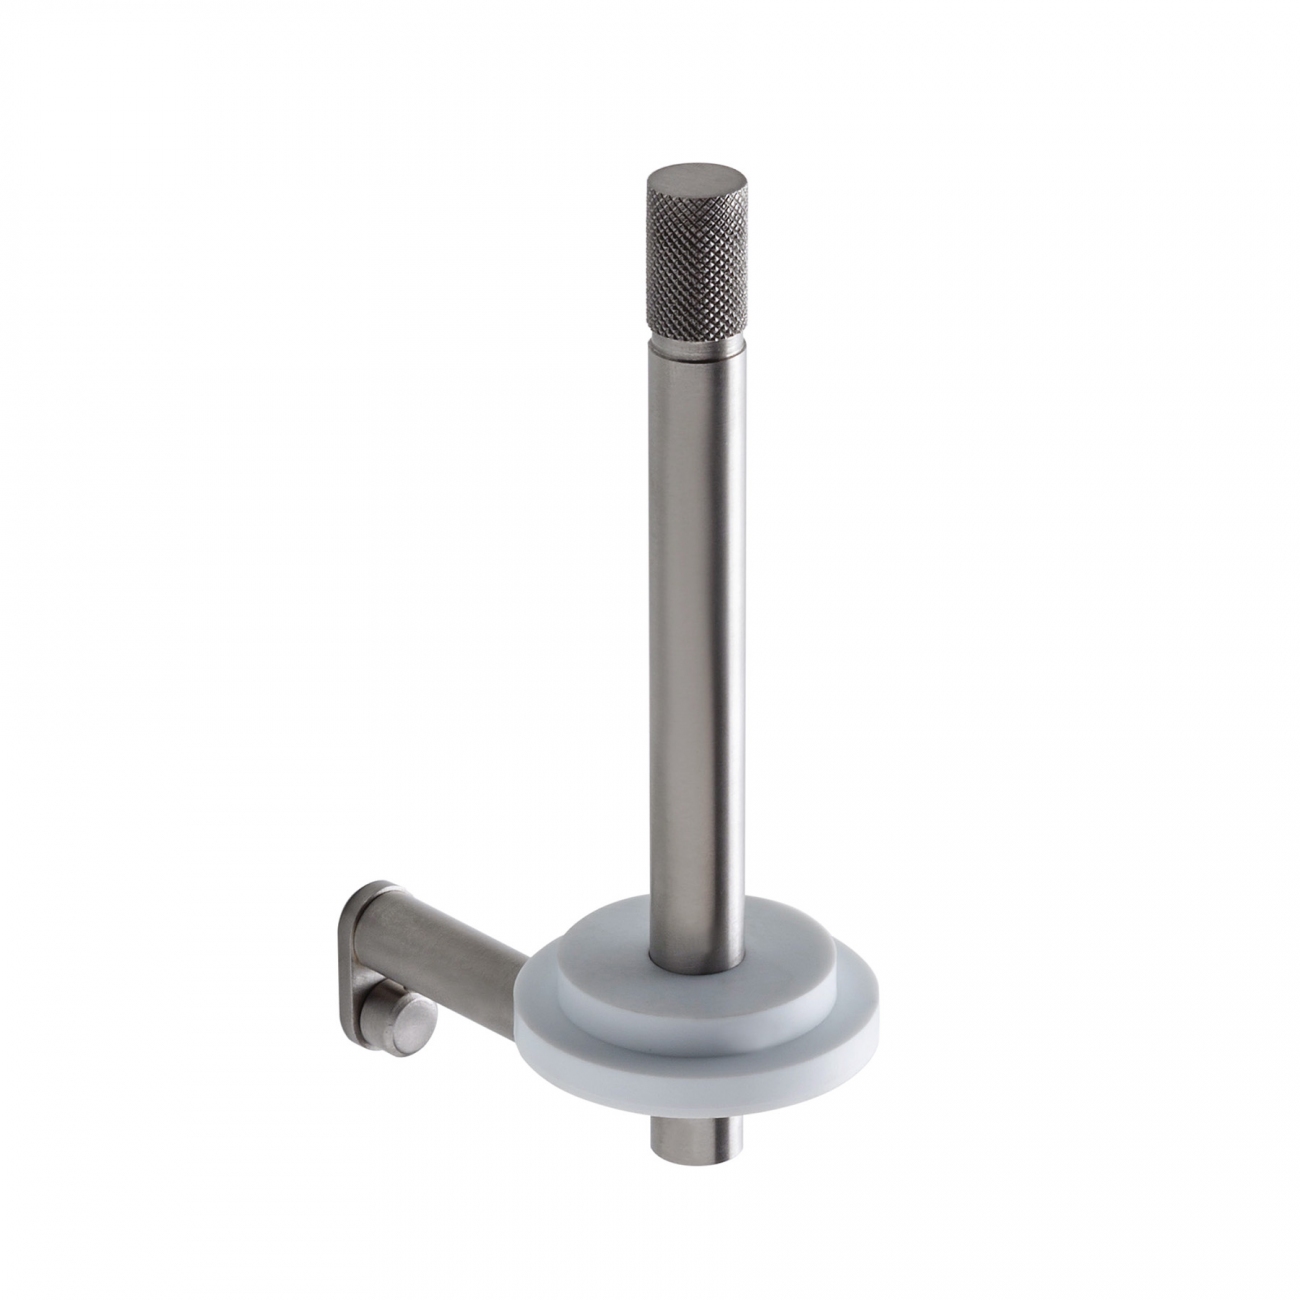 Treemme 22mm spare toilet roll holder